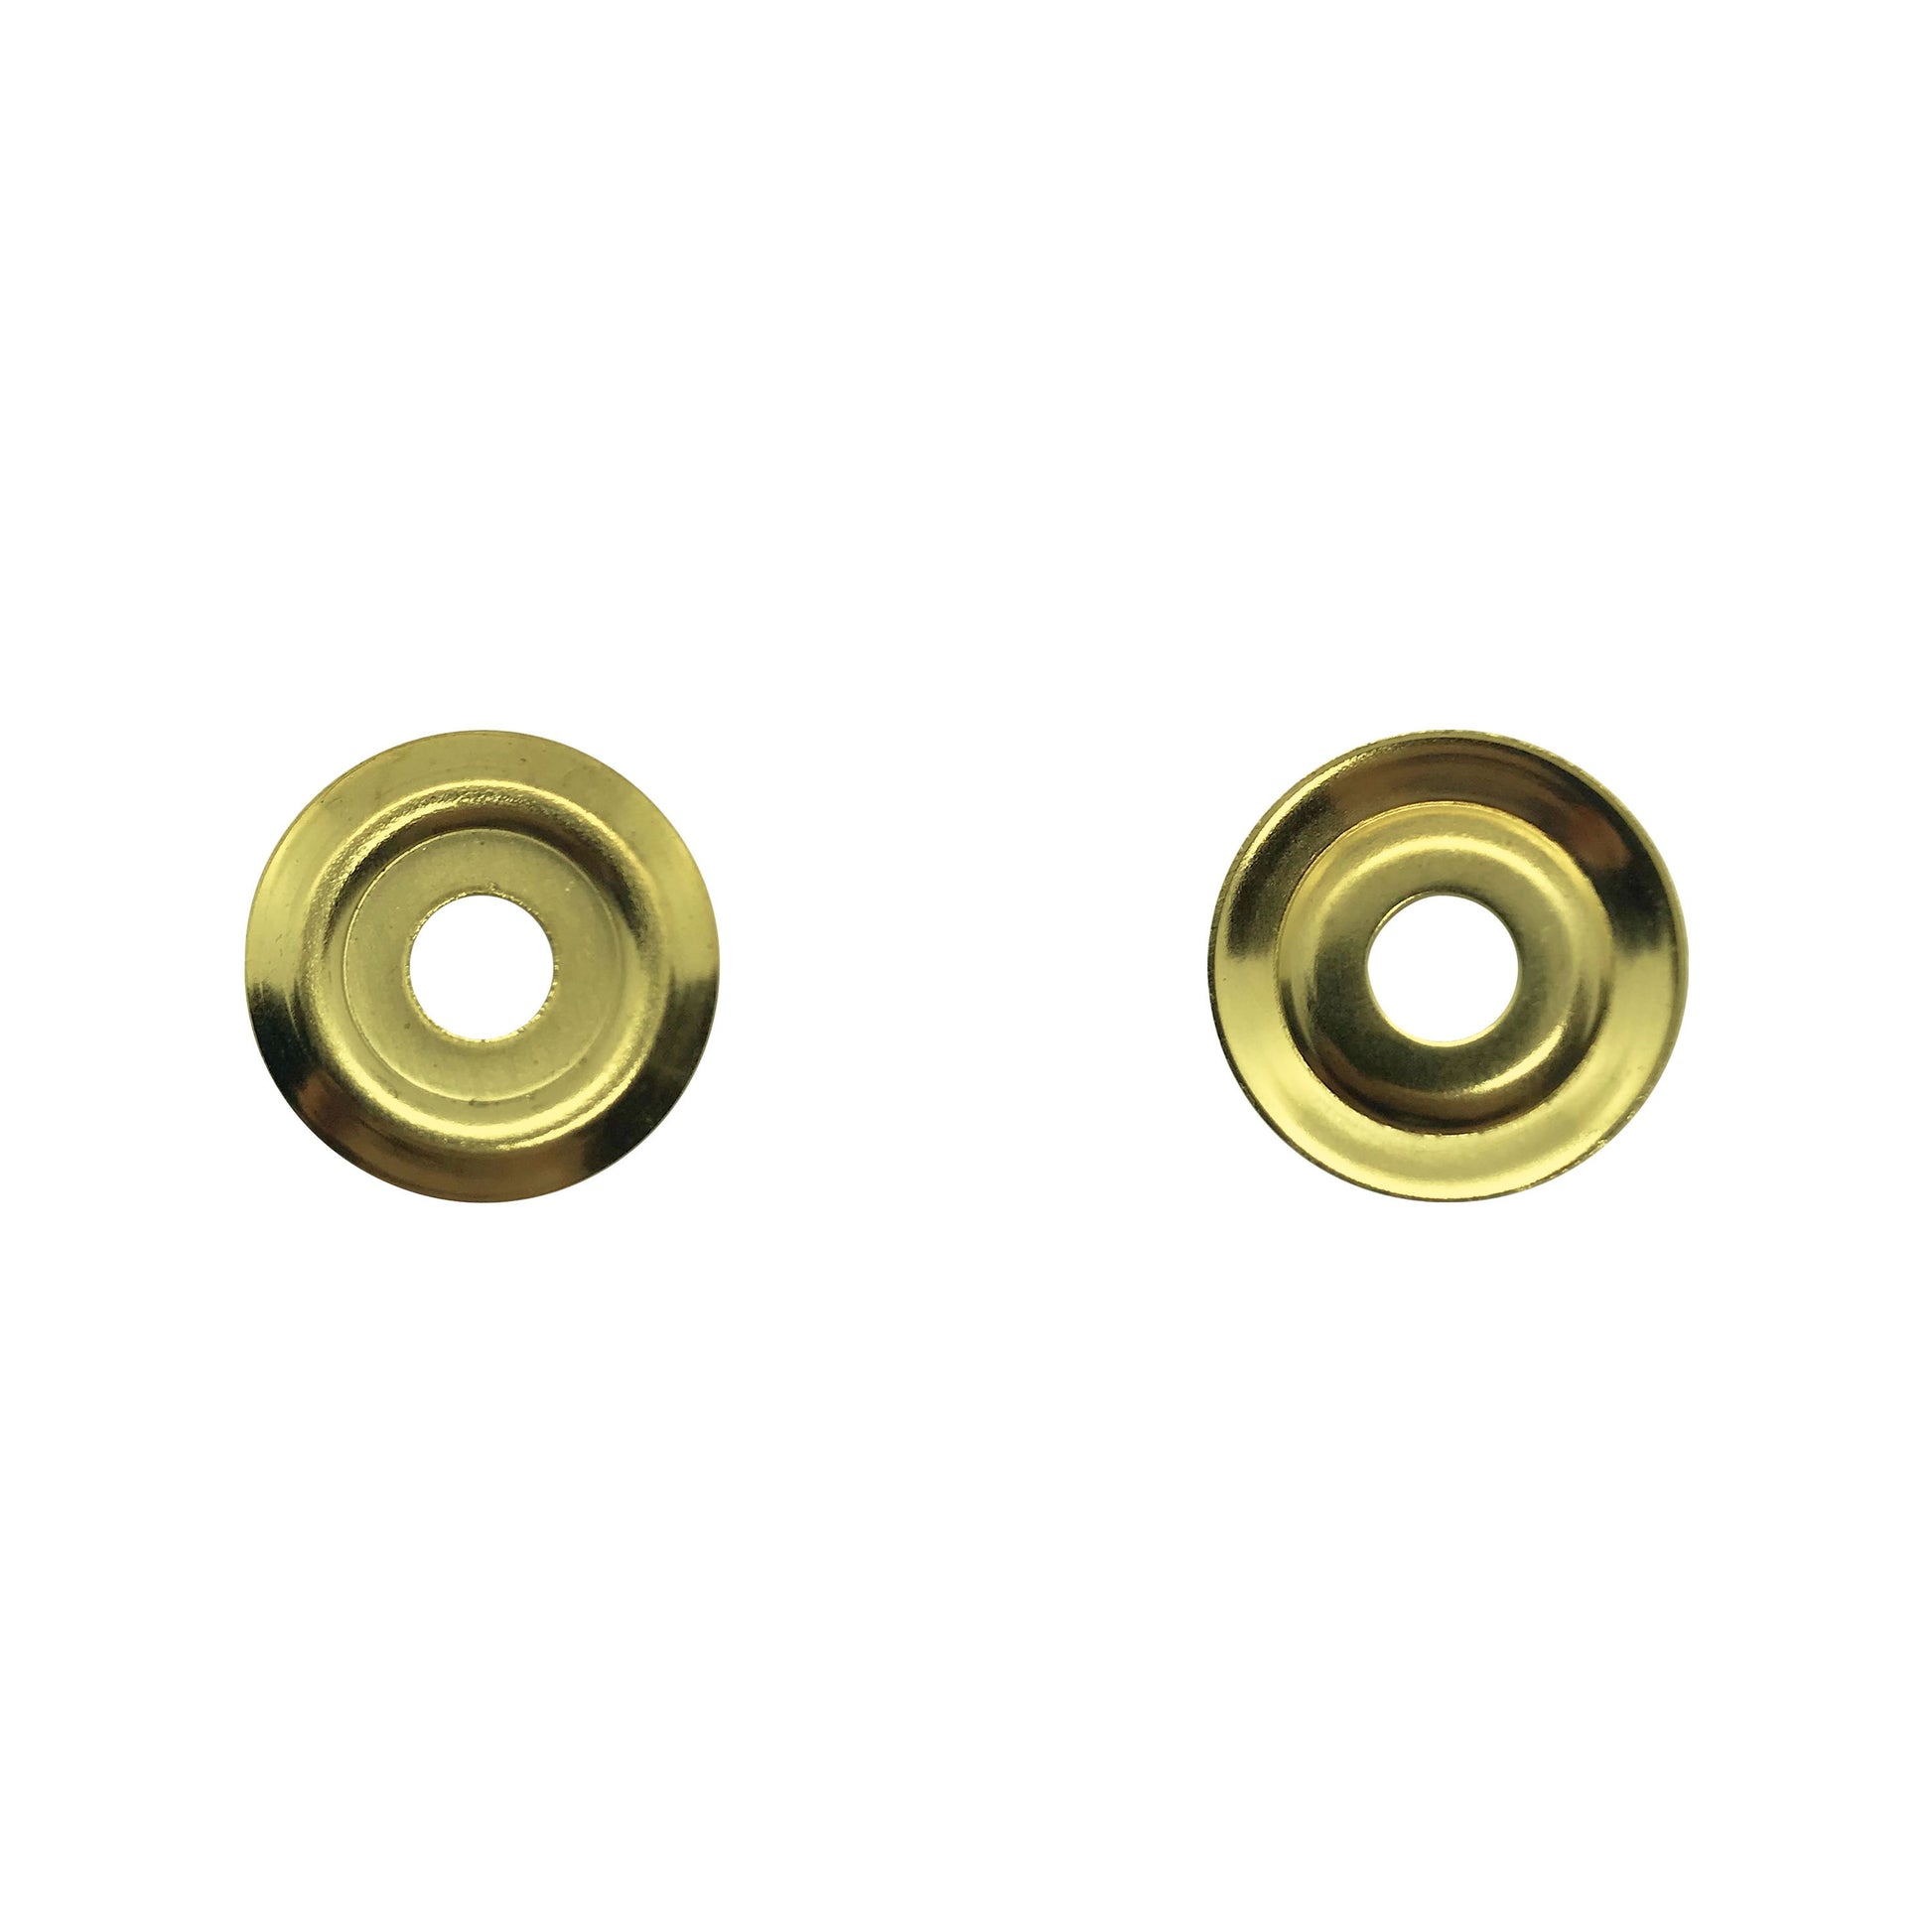 Binding Screw Washer - Front / Back - Brass / Gold-coloured by Gobrecht & Ulrich